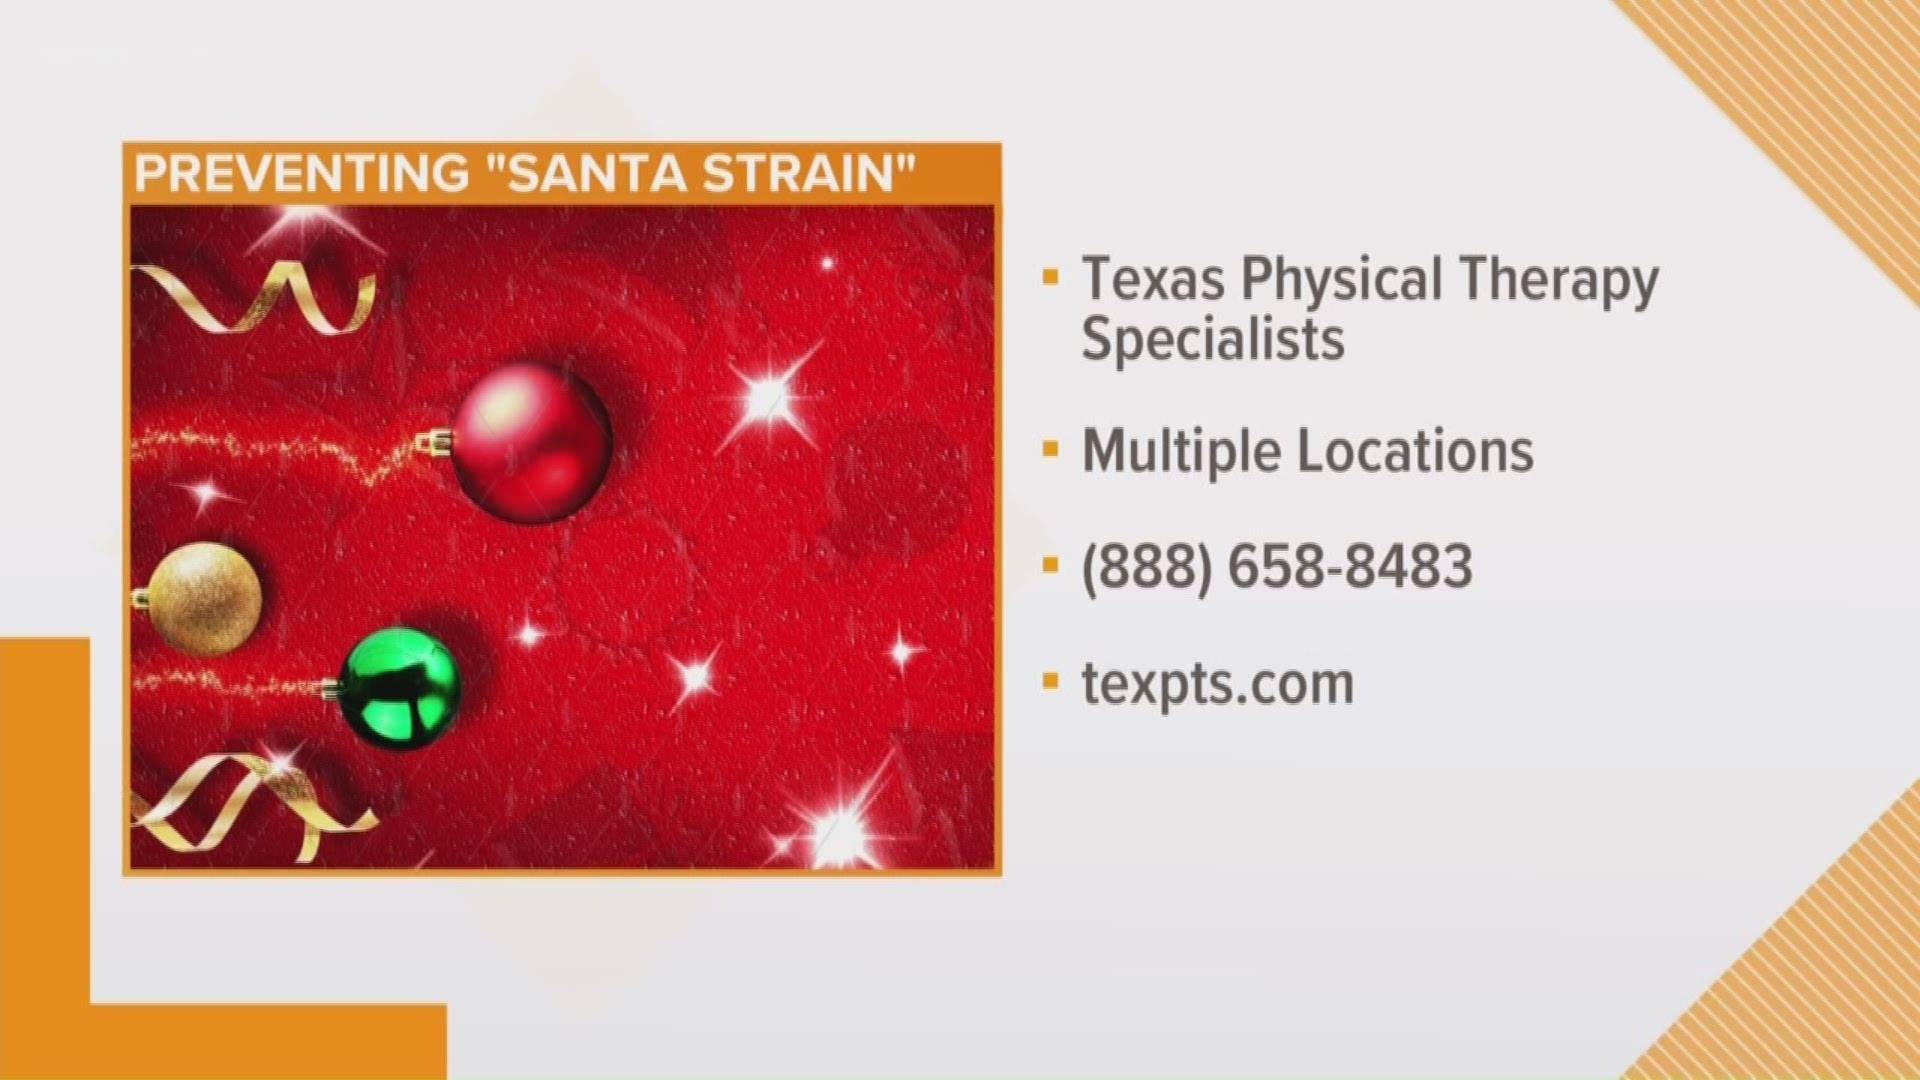 The most wonderful time of the year can easily become the most painful time of the year. Dr. Andrew Bennett from Texas Physical Therapy Specialists shares more.